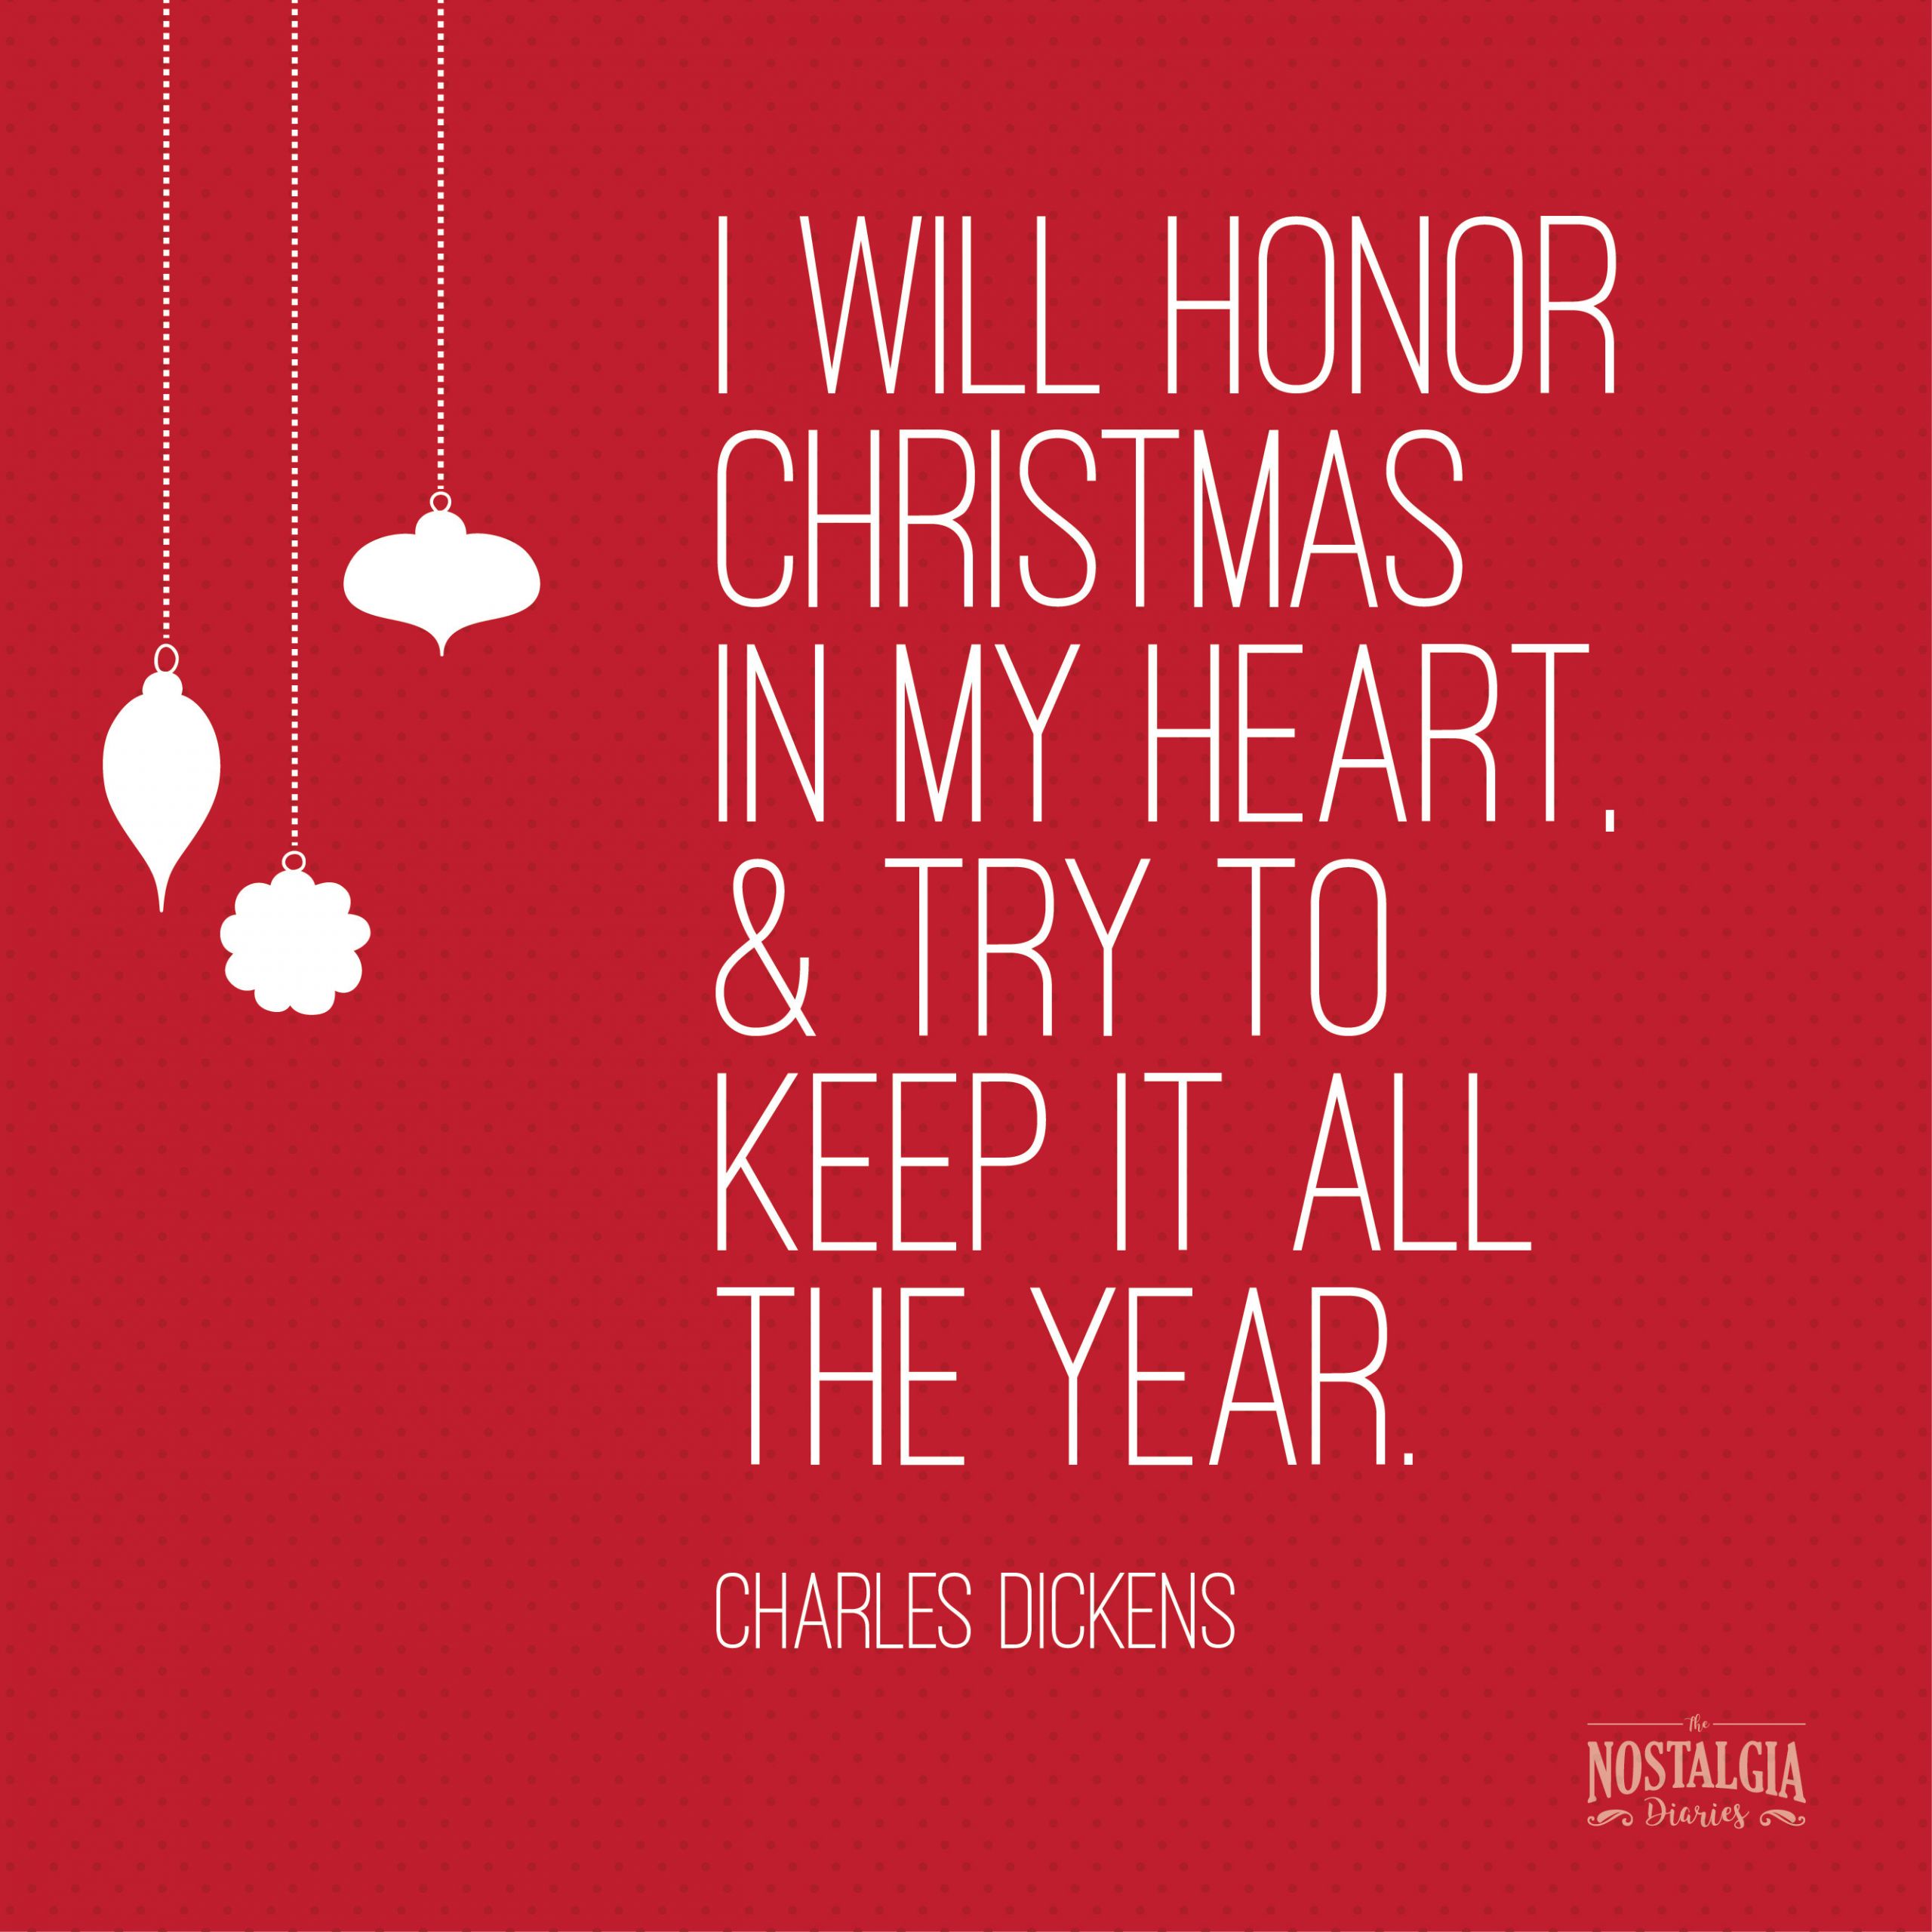 Spirit Of Christmas Quotes
 12 Nostalgic Days of Christmas 10 Quotes That Honor the